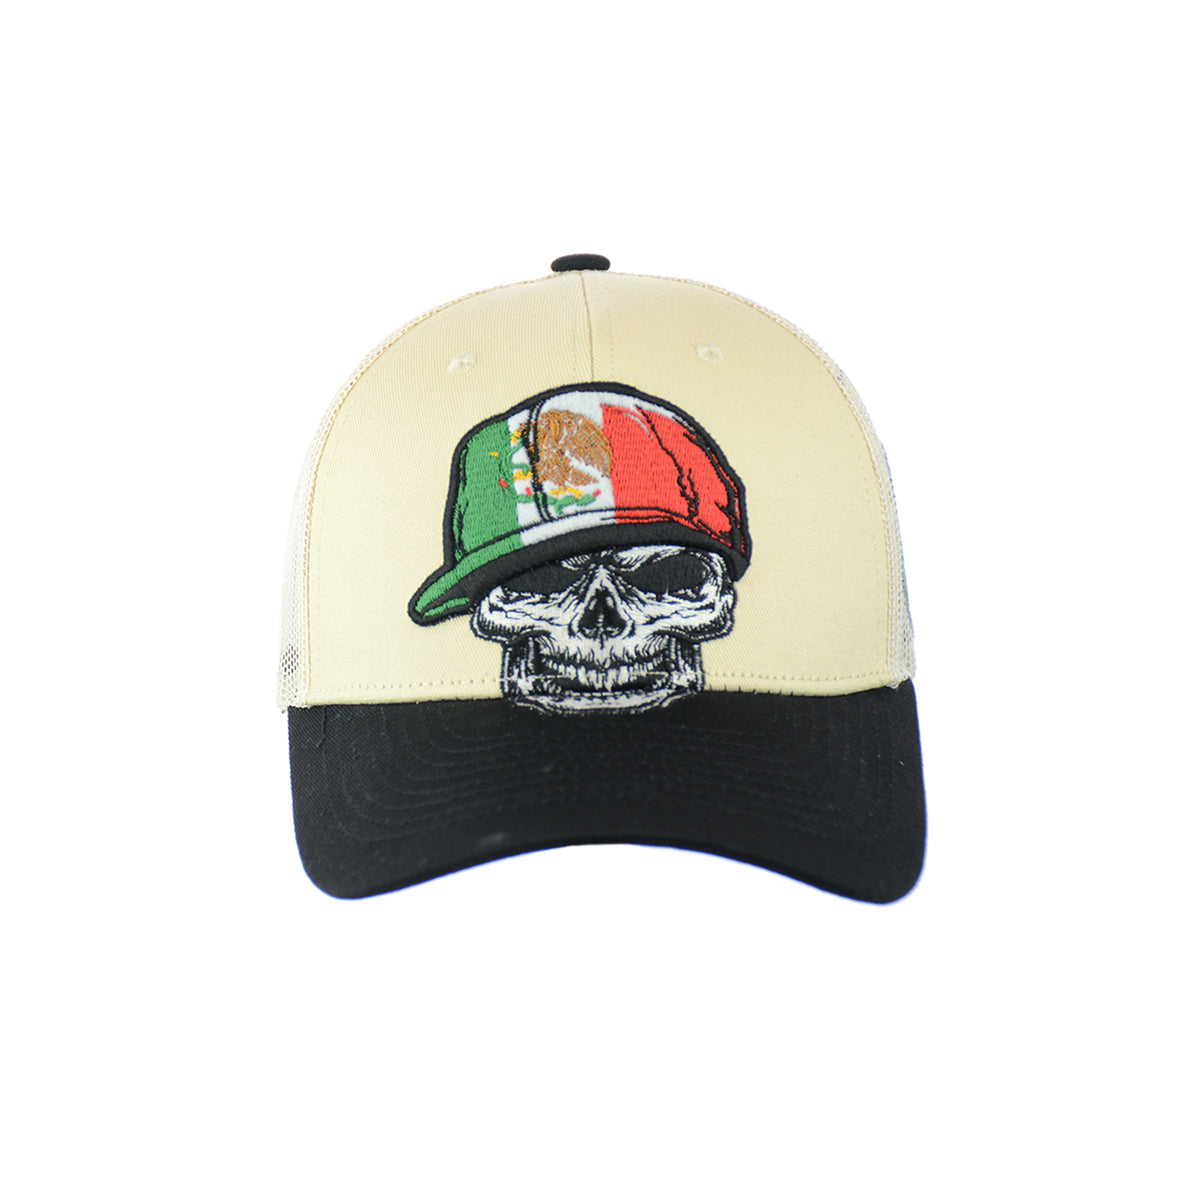 Skull Mexican Flat Hat Embroidered Snapback